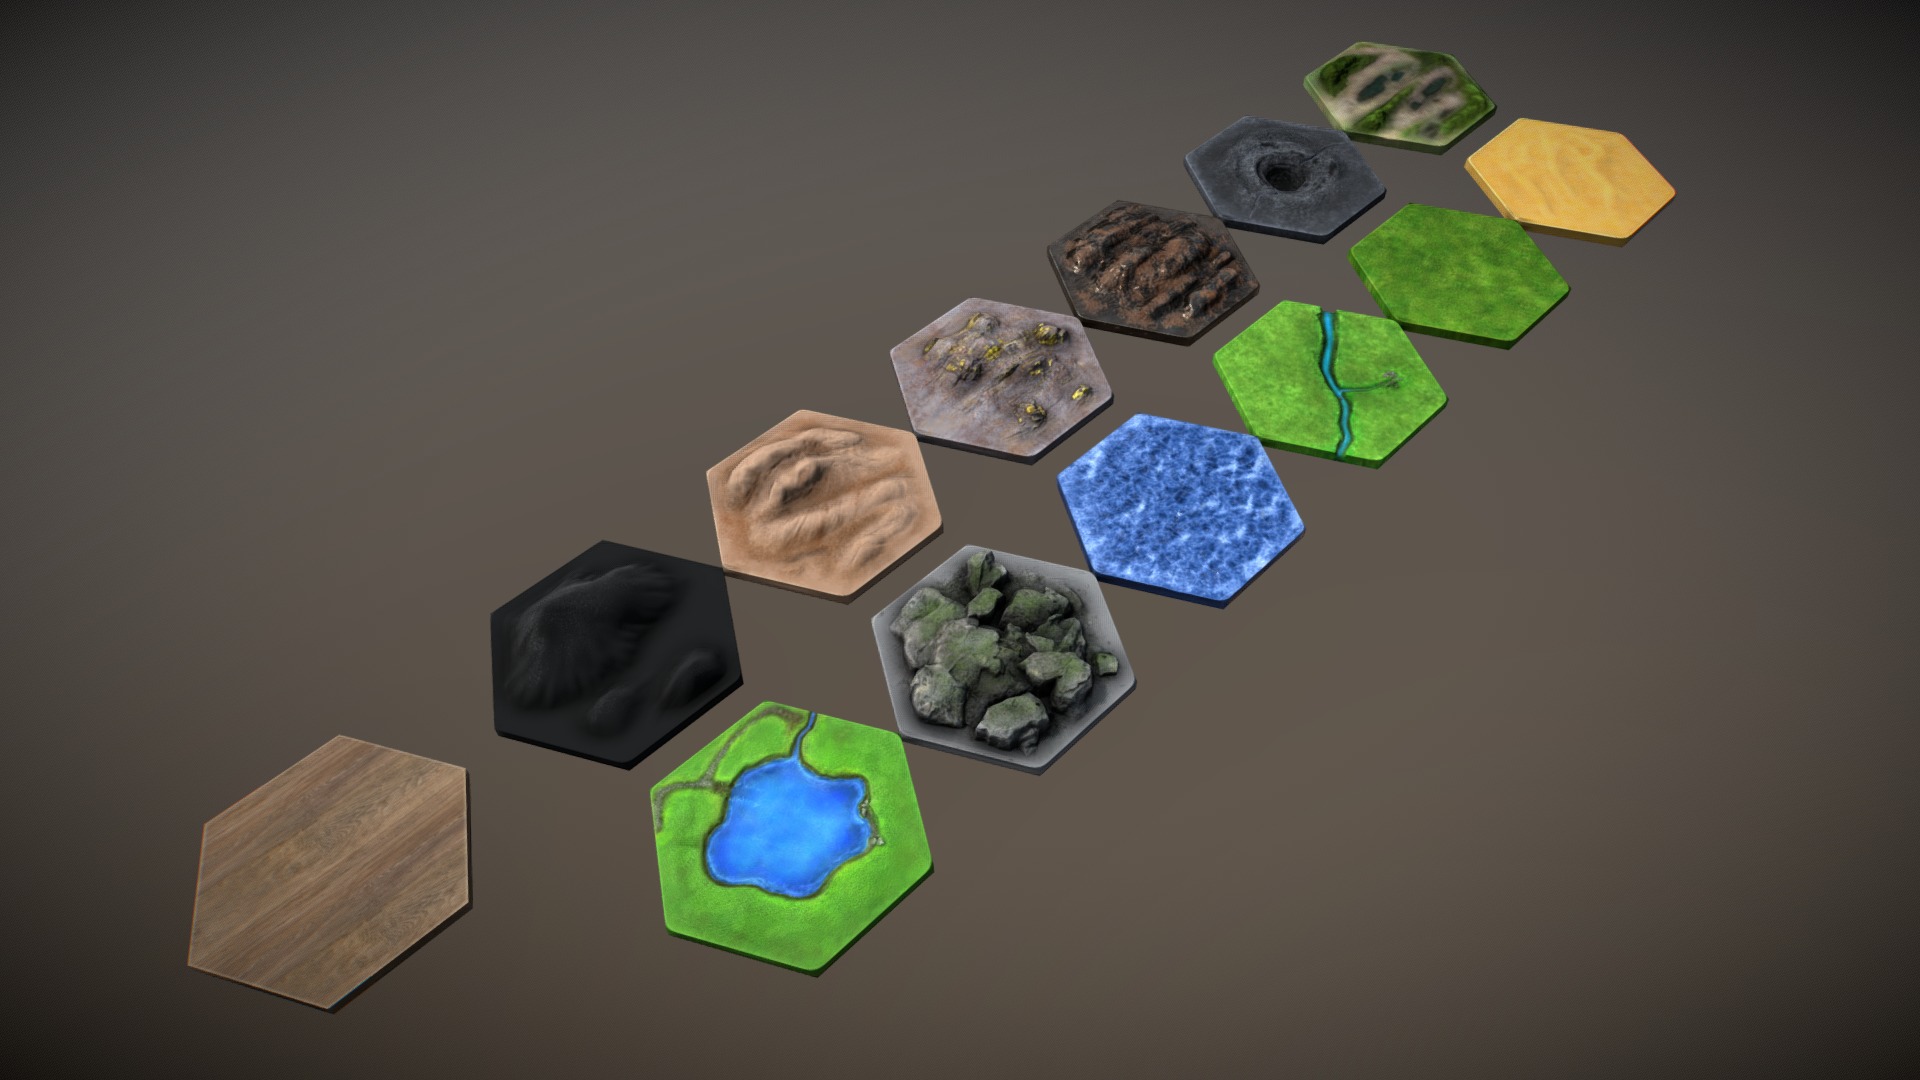 3D model Hexlands Set1 - This is a 3D model of the Hexlands Set1. The 3D model is about a group of different colored rocks.